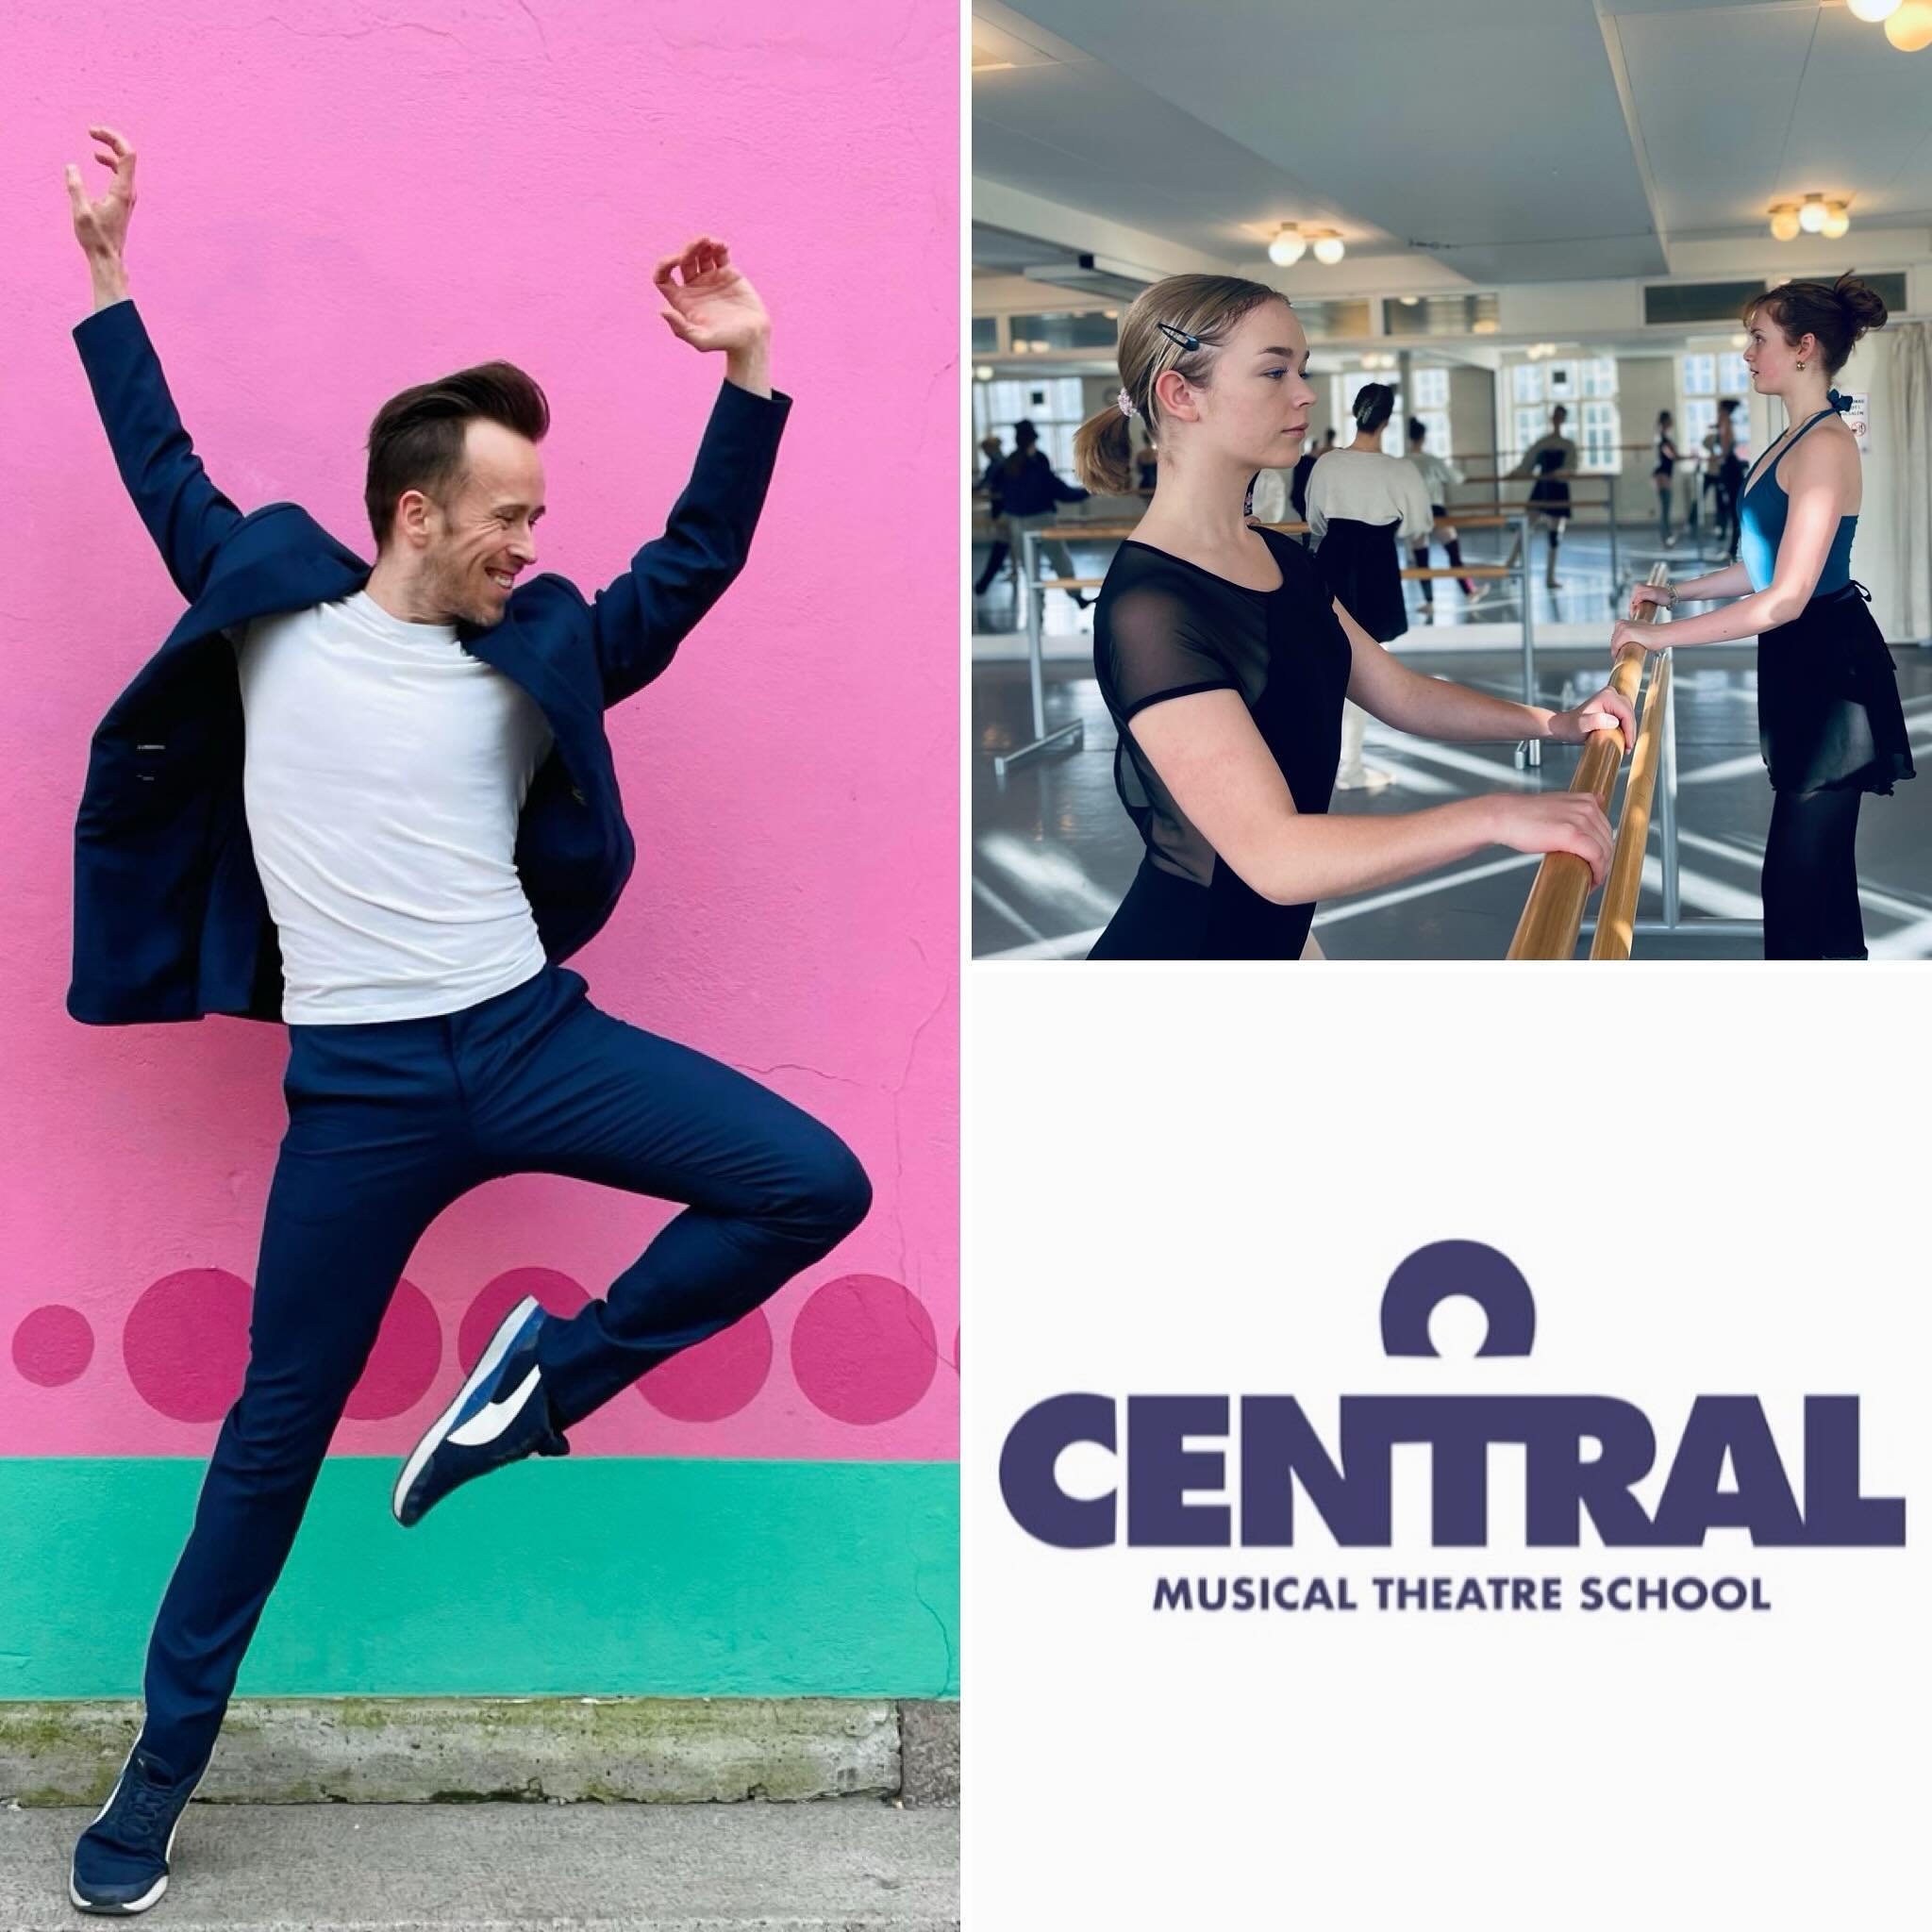 Drop In Classes This Week At Central !

Thursday 18th April
Ballet with Hayley Franks H&oslash;ier
9.00 - 10.30
100 kr per class

Friday 19th April 
Jazz with Paul James Rooney
13.00 - 14.30
100 kr per class
#dropin #ballet #jazz #centralmusicaltheat